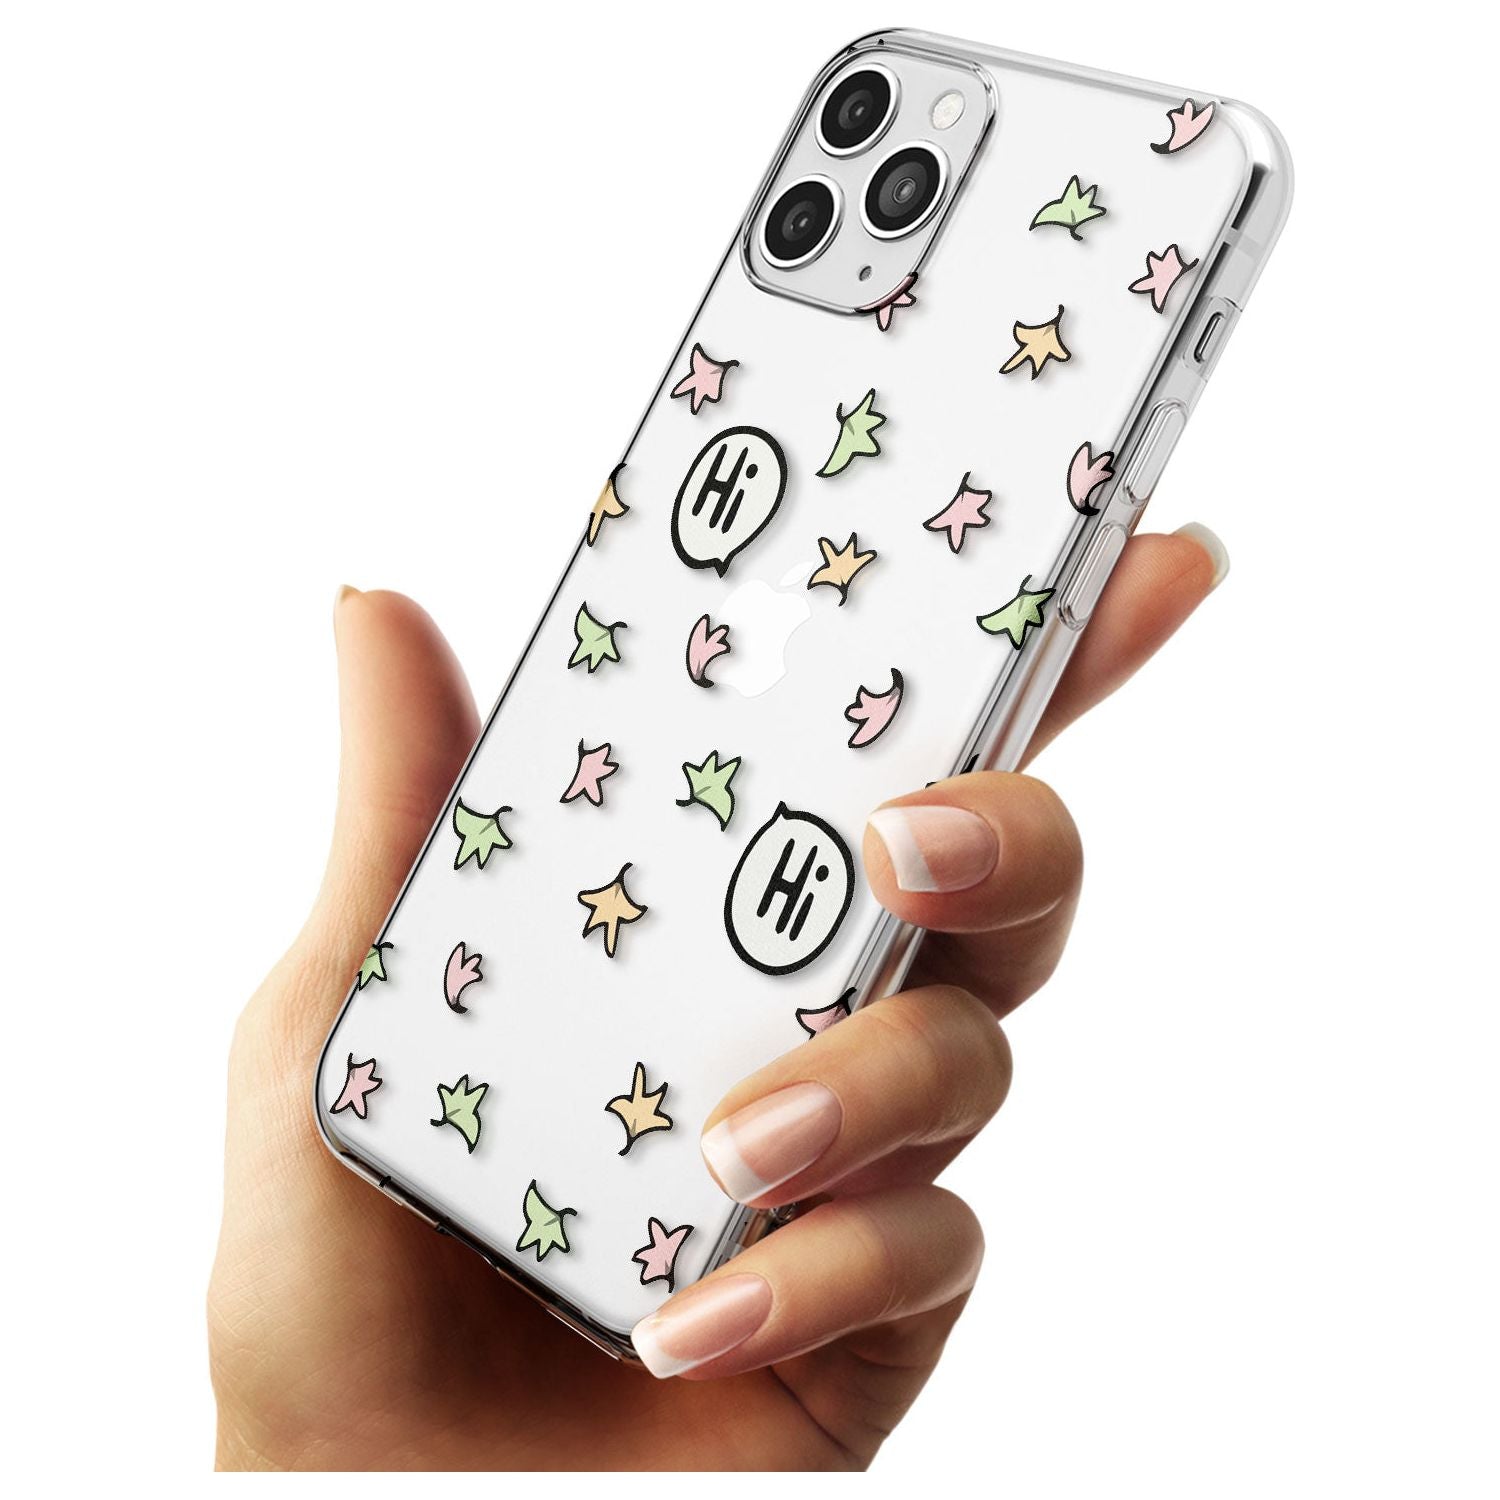 Heartstopper Leaves Pattern Slim TPU Phone Case for iPhone 11 Pro Max